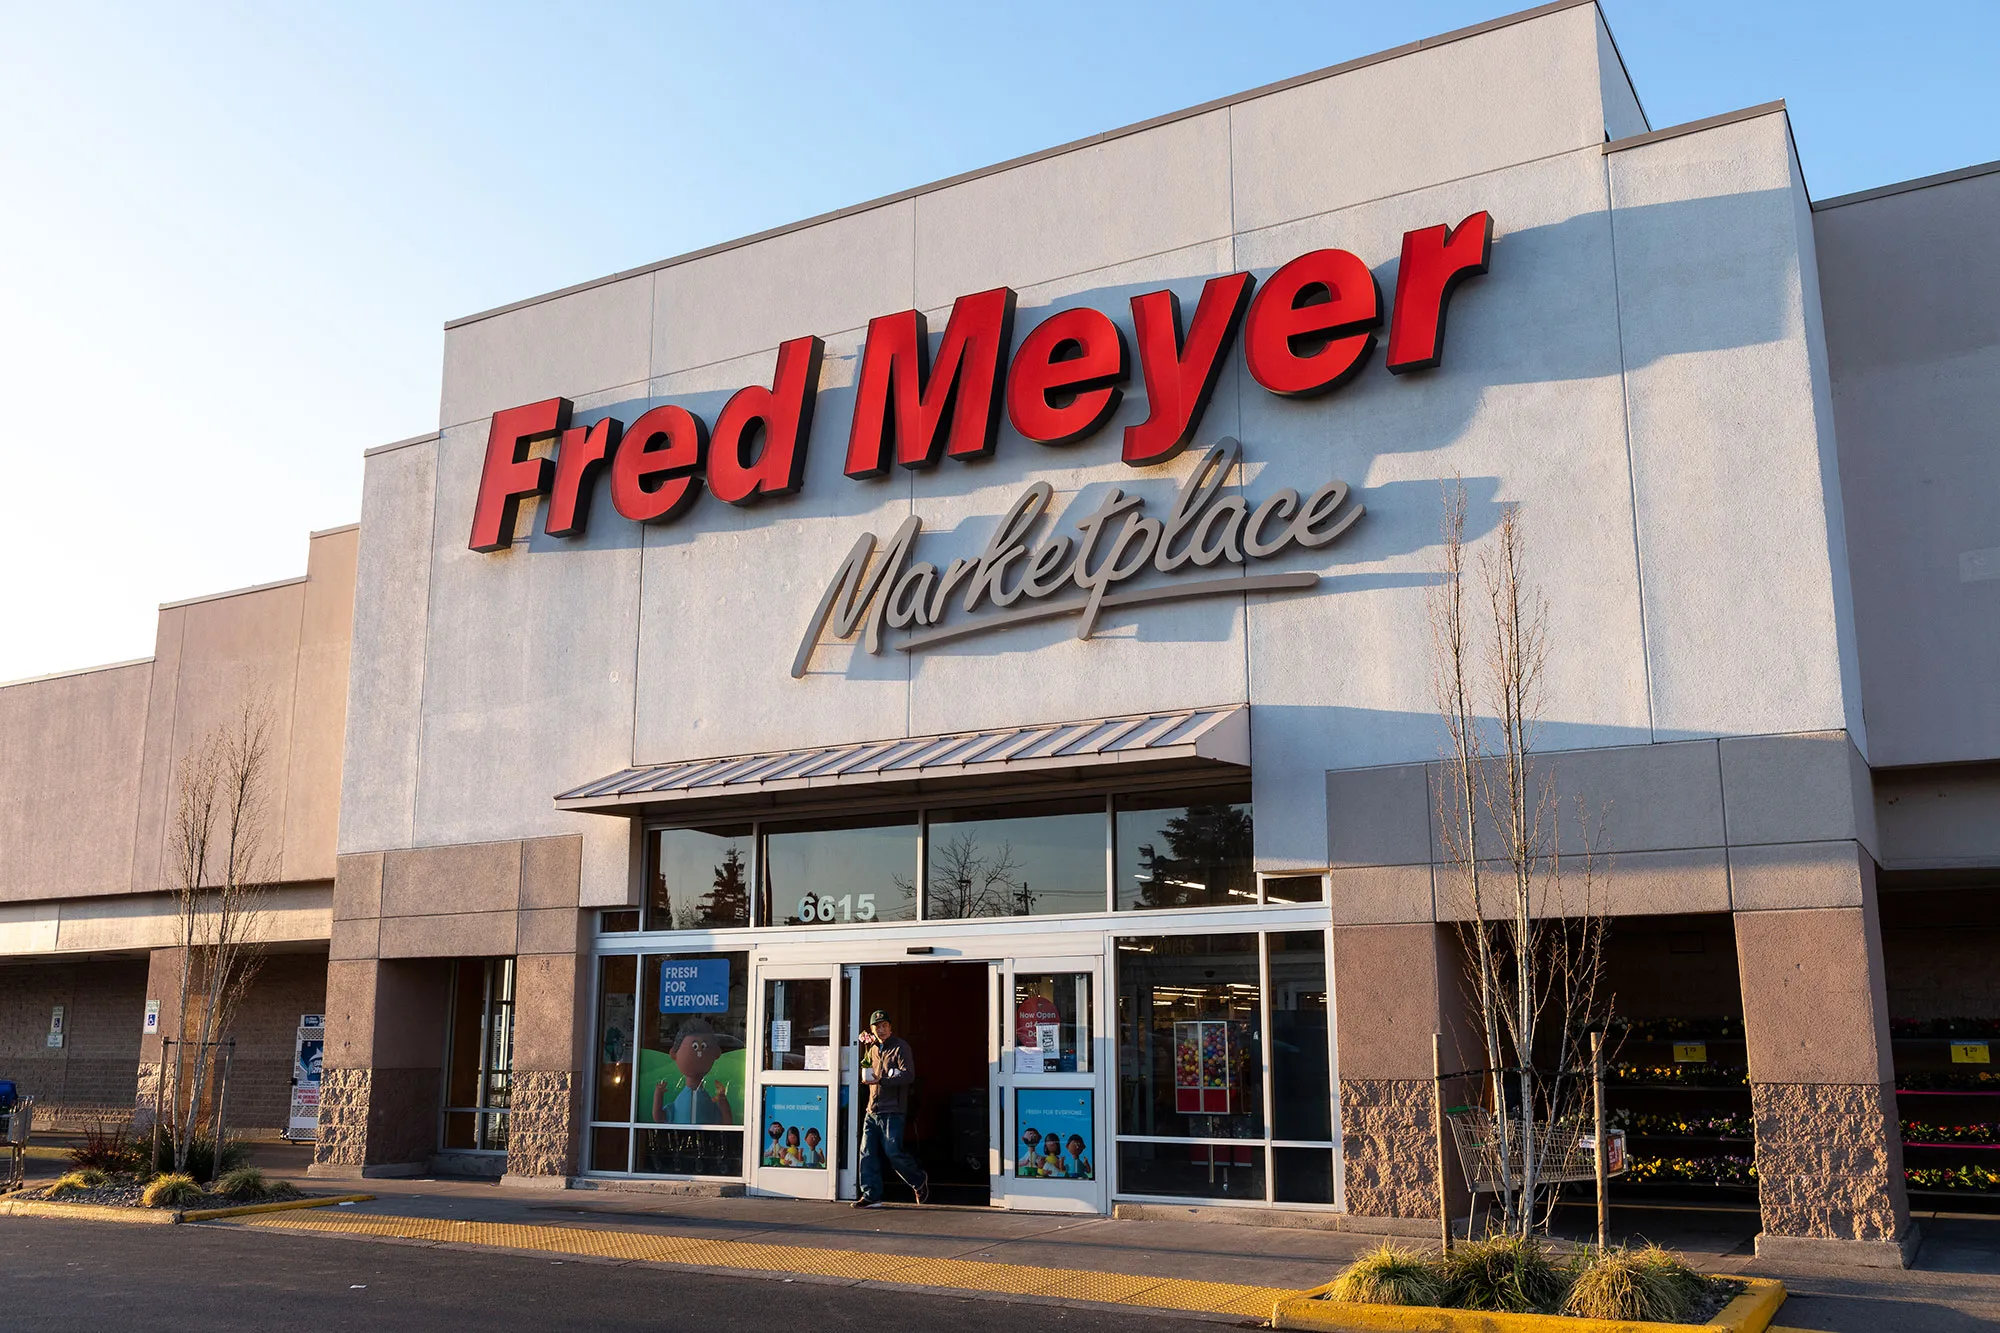 How to find Fred Meyer Hours